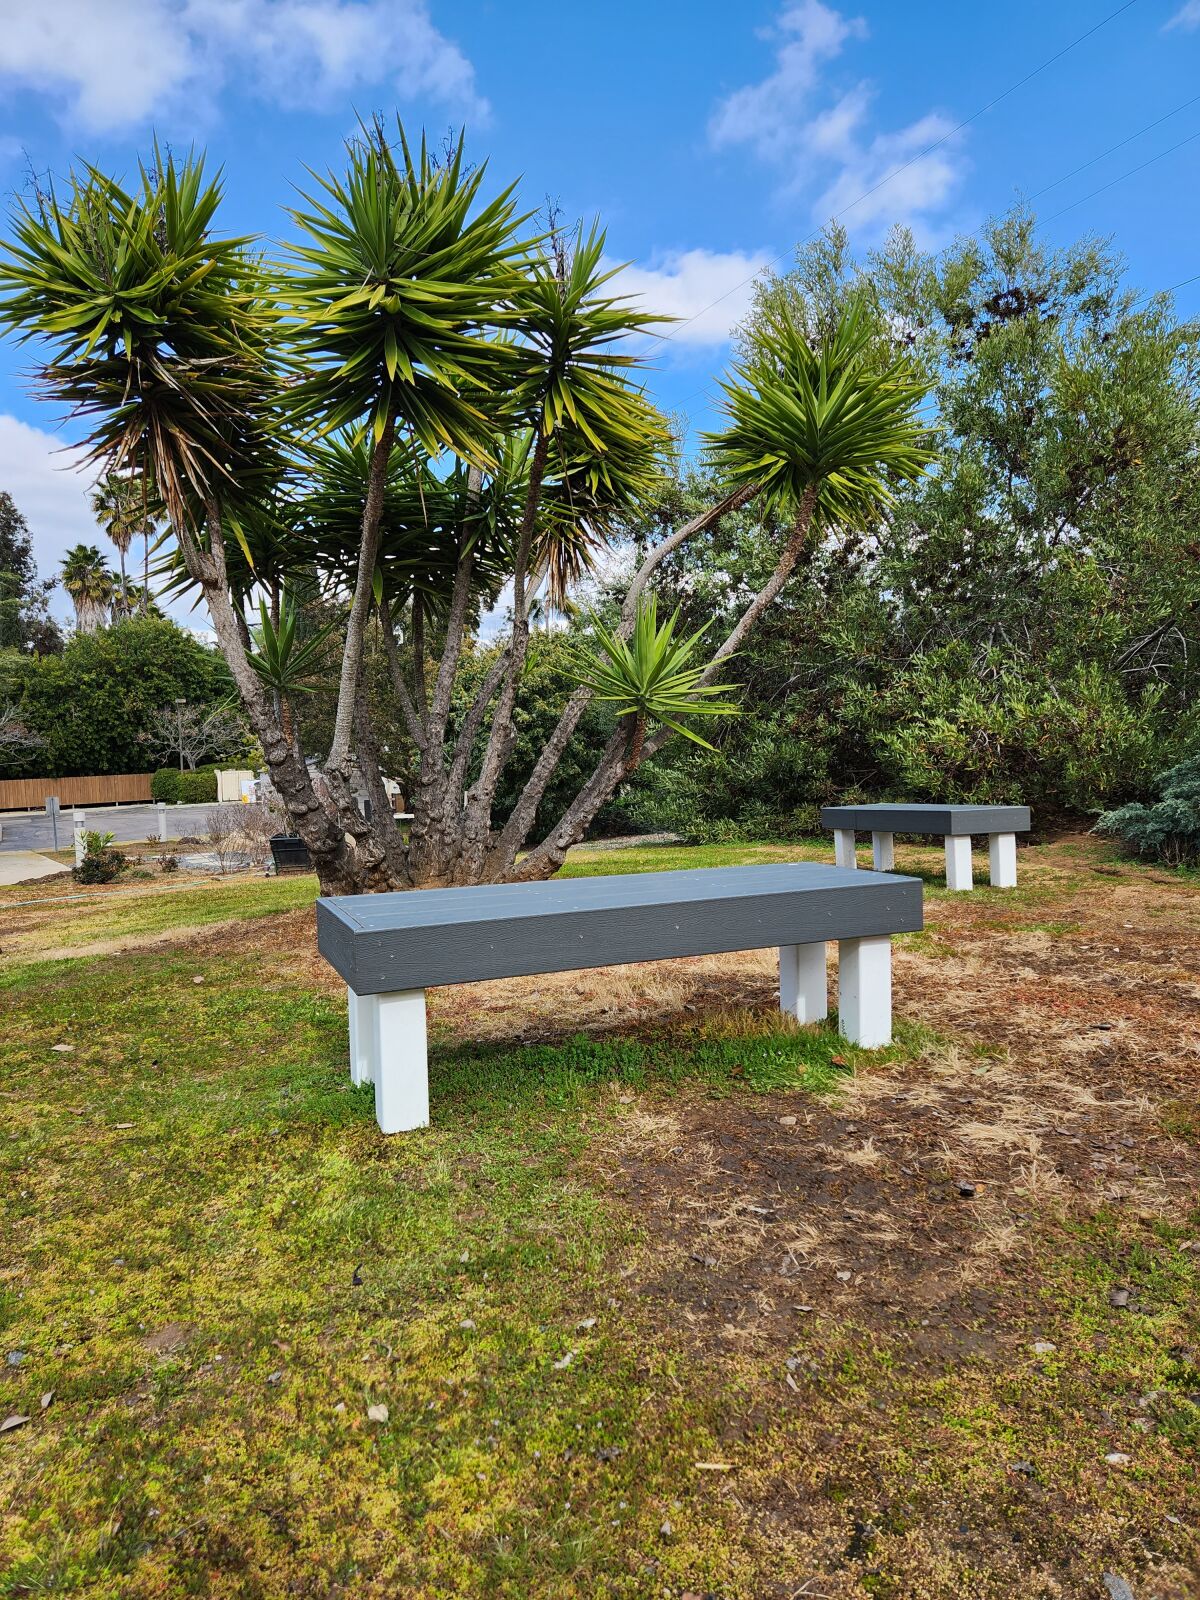 As part of his Eagle Scout project, Anand Nair built two meditation benches for the Shiva Vishnu Temple in Poway. 